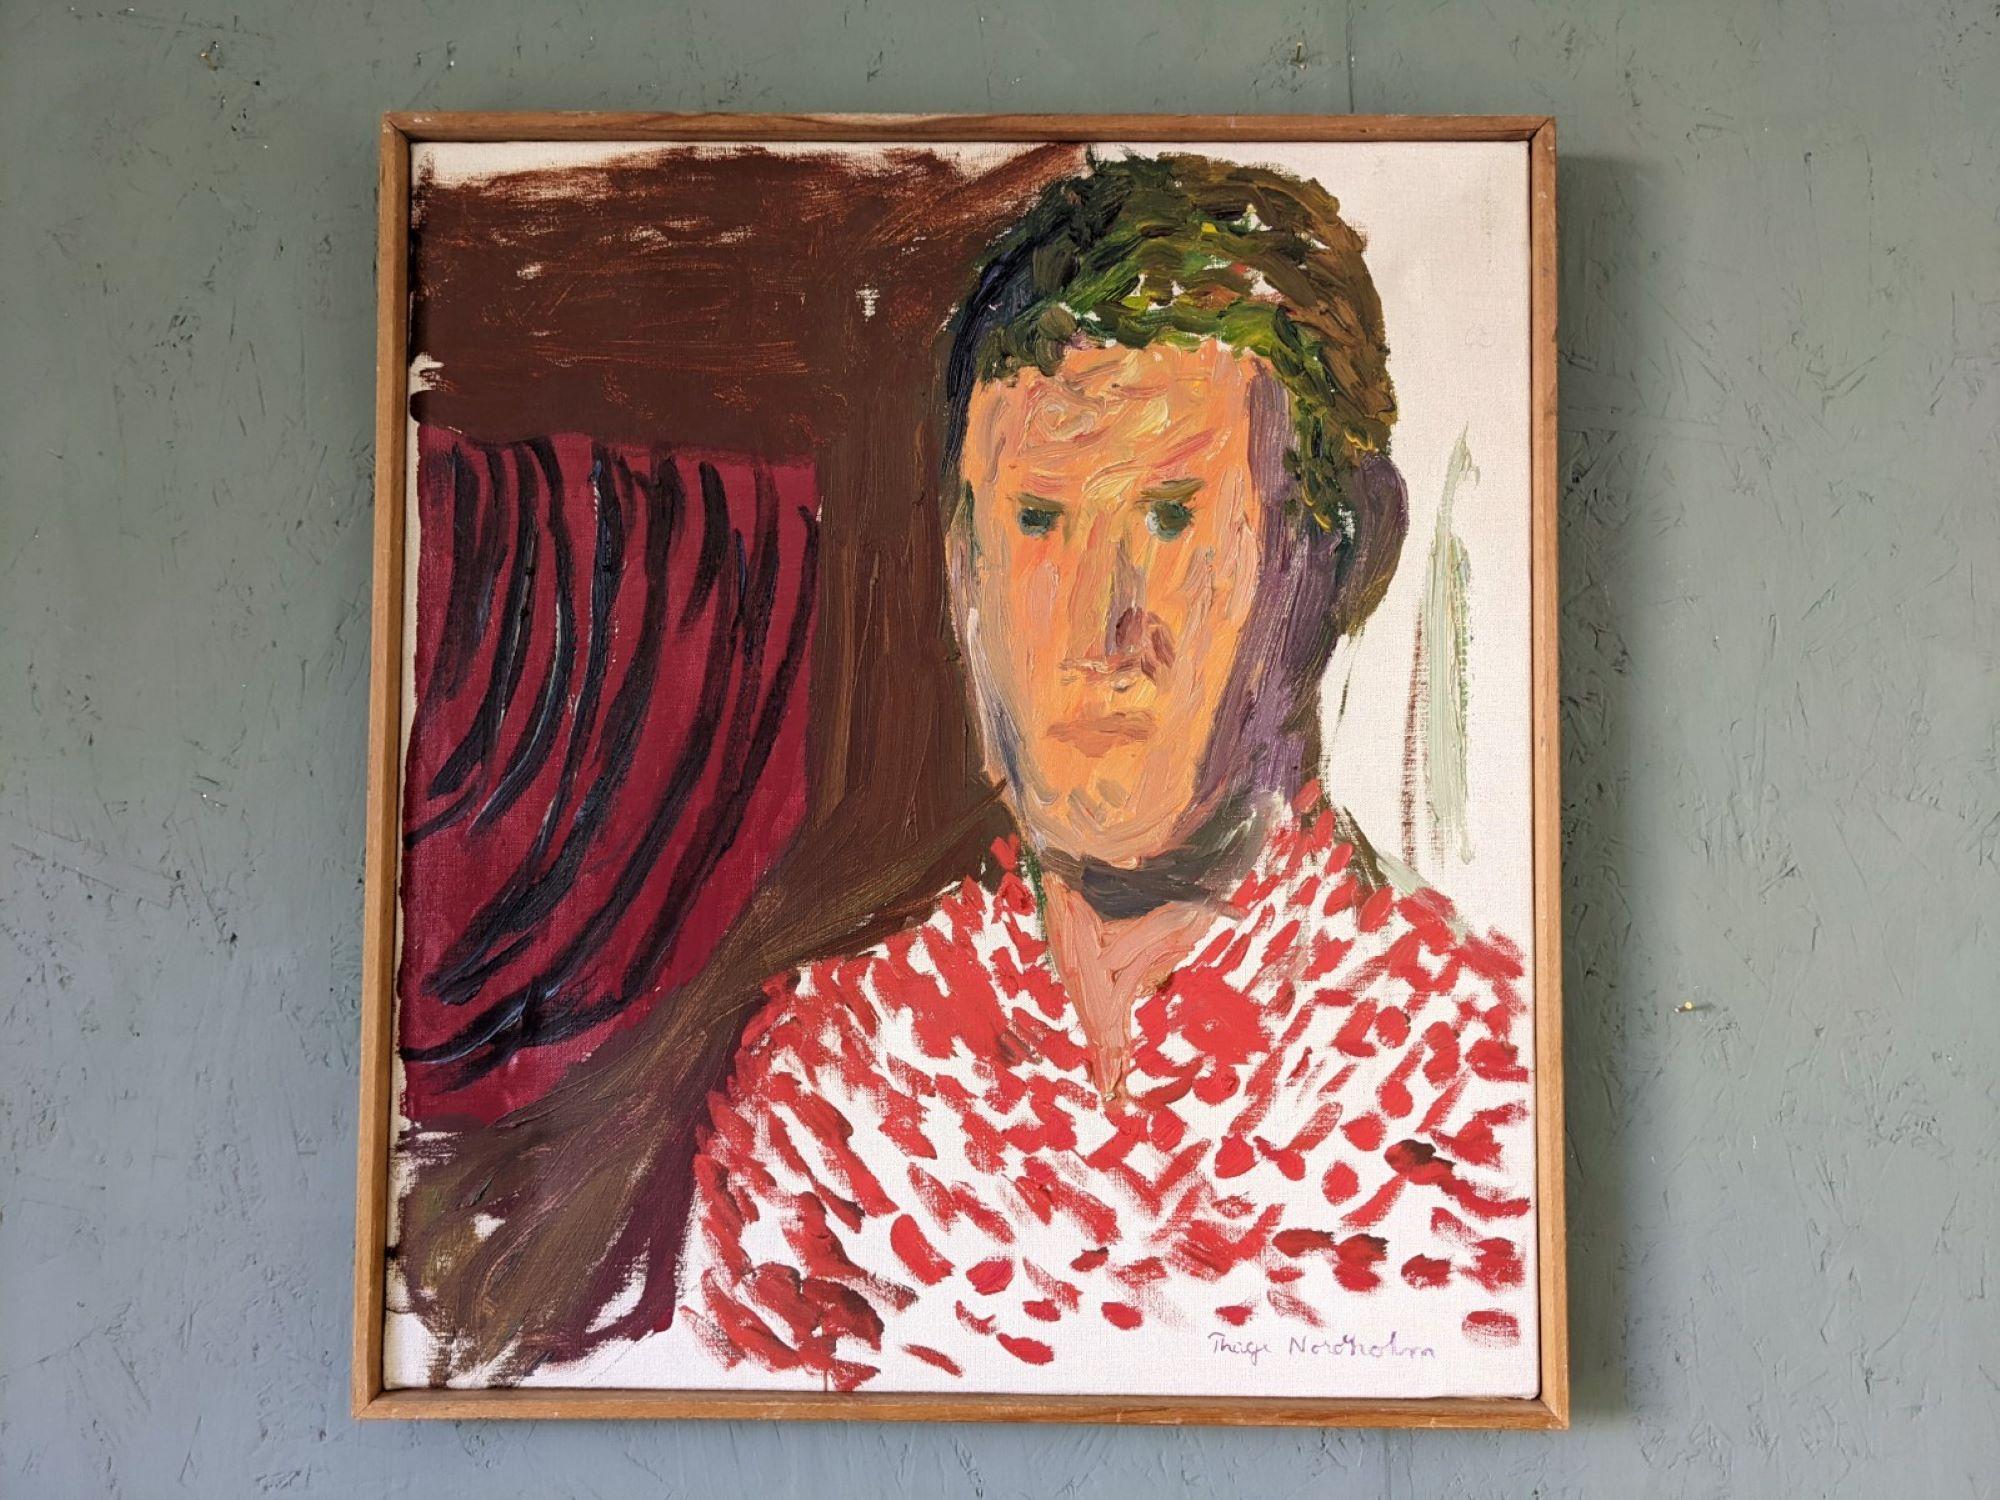 PAUL
Size: 58.5 x 53 cm (including frame)
Oil on canvas

A striking and expressive mid-century portrait painting, executed in oil onto canvas.

The composition depicts a male figure in an eye-catching red and white patterned shirt, against a